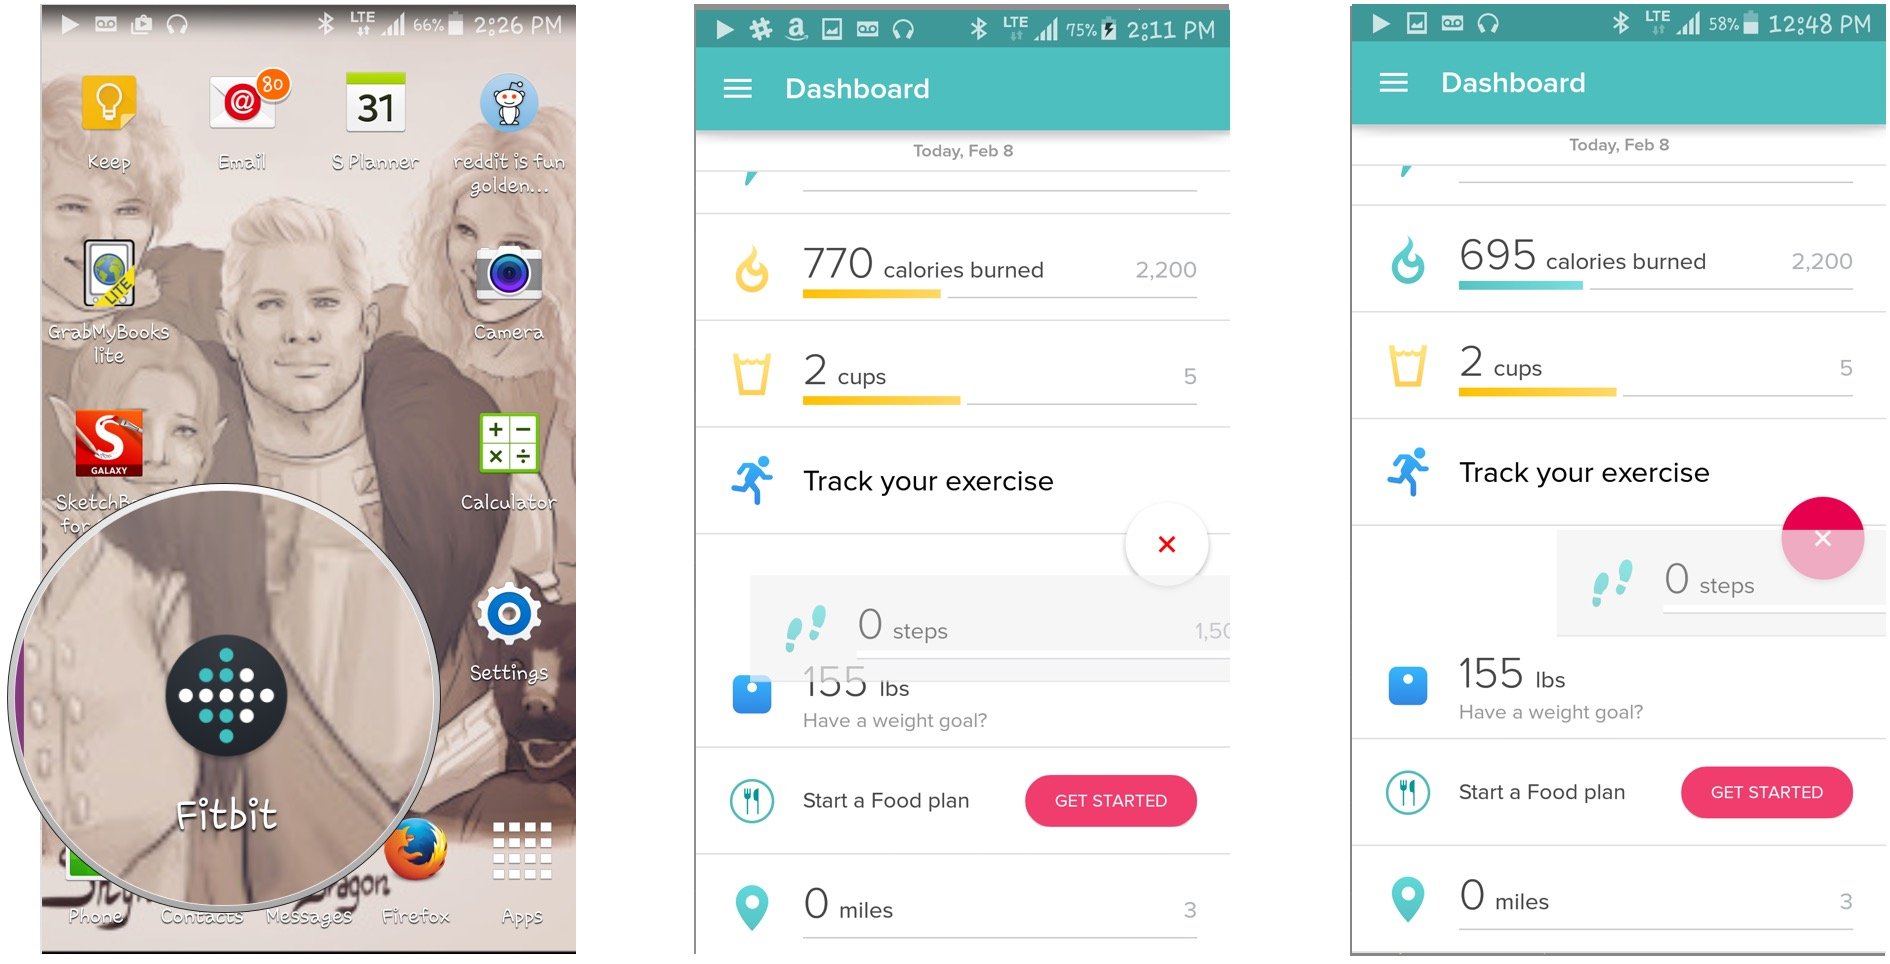 fitbit android